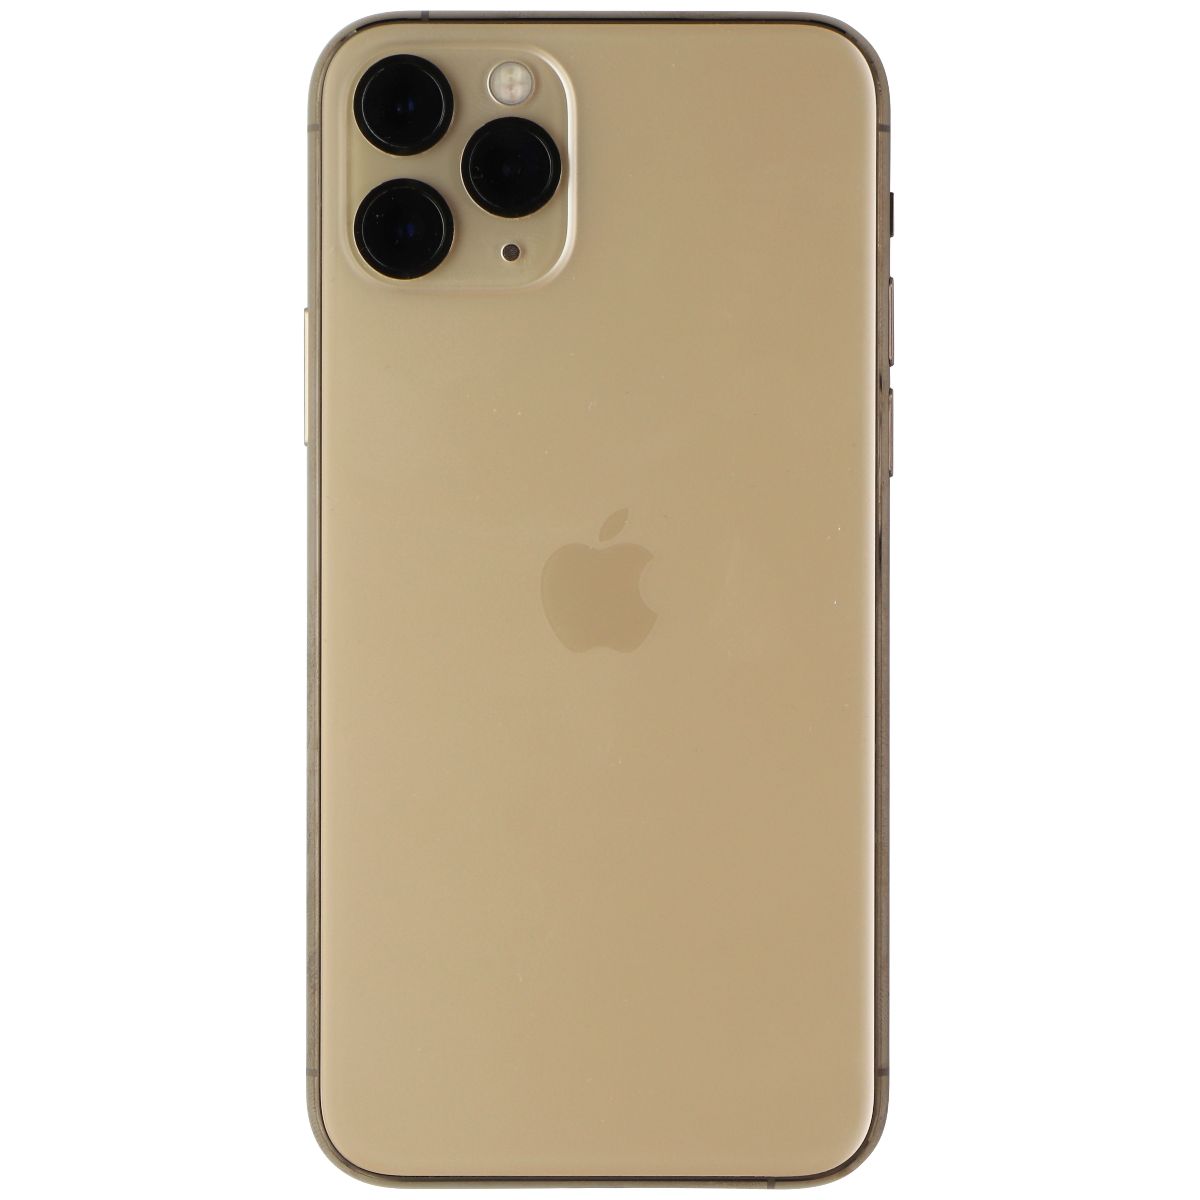 Apple iPhone 11 Pro (5.8-inch) Smartphone A2160 (Unlocked) - 64GB / Gold Cell Phones & Smartphones Apple    - Simple Cell Bulk Wholesale Pricing - USA Seller